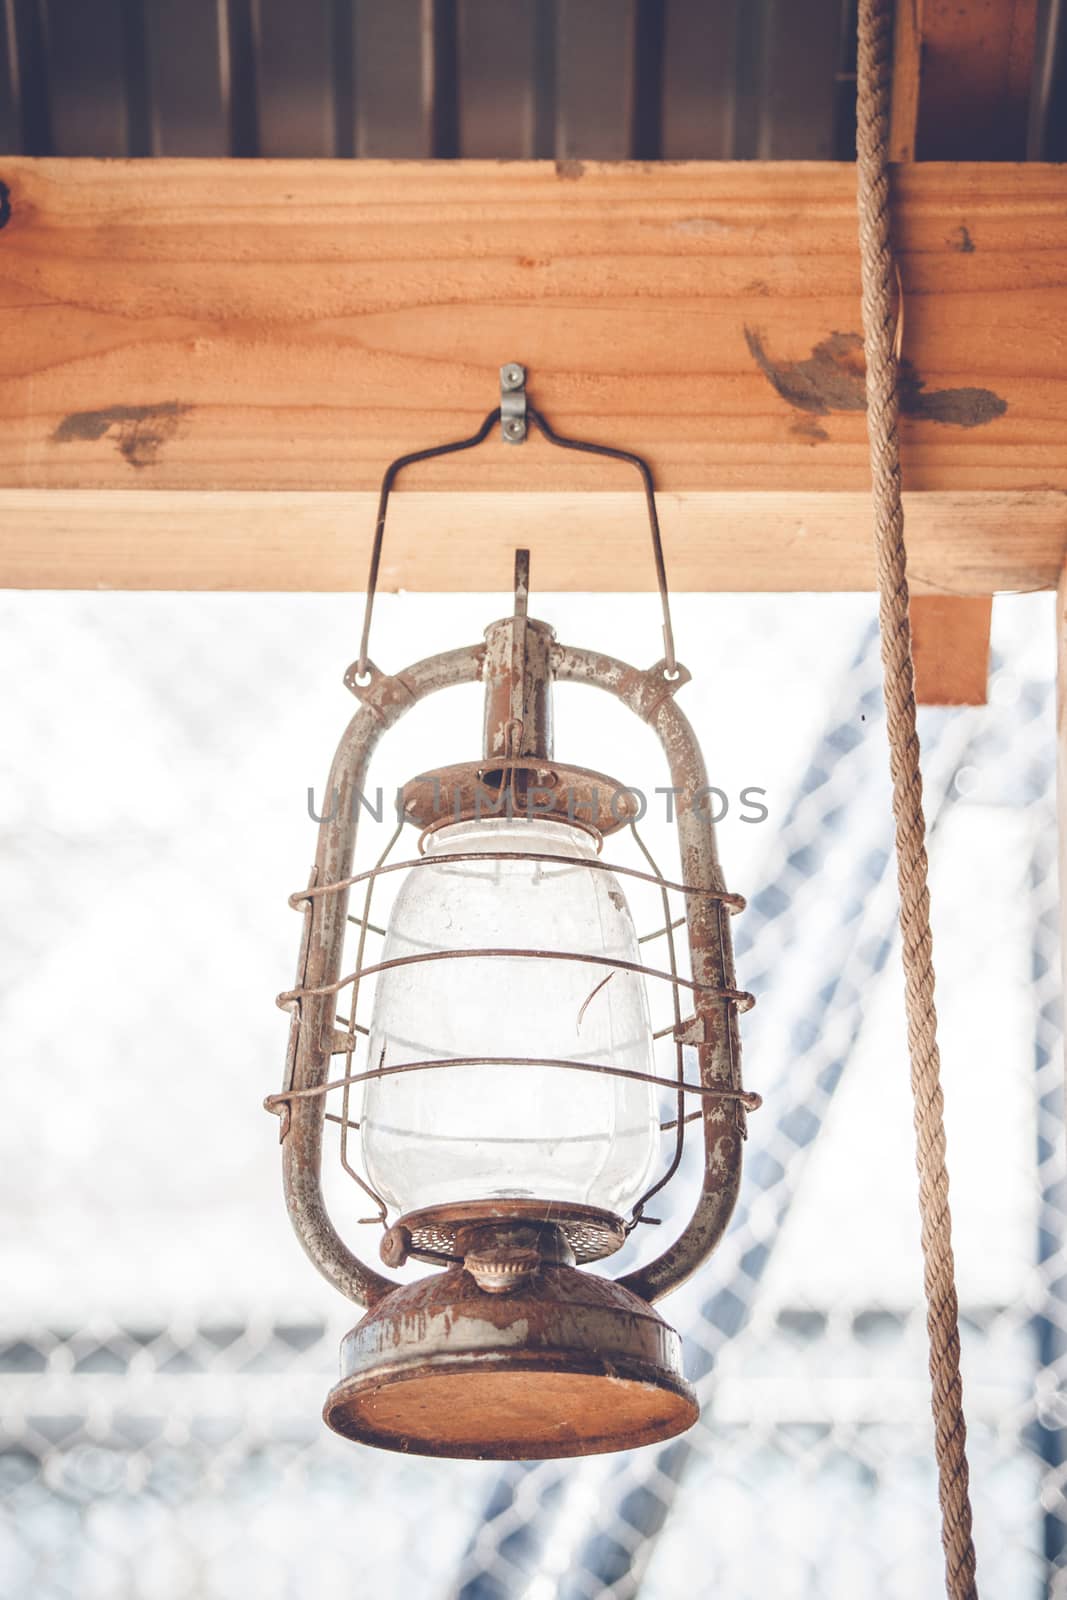 Vintage western lantern hanging on a wooden plank in a barn